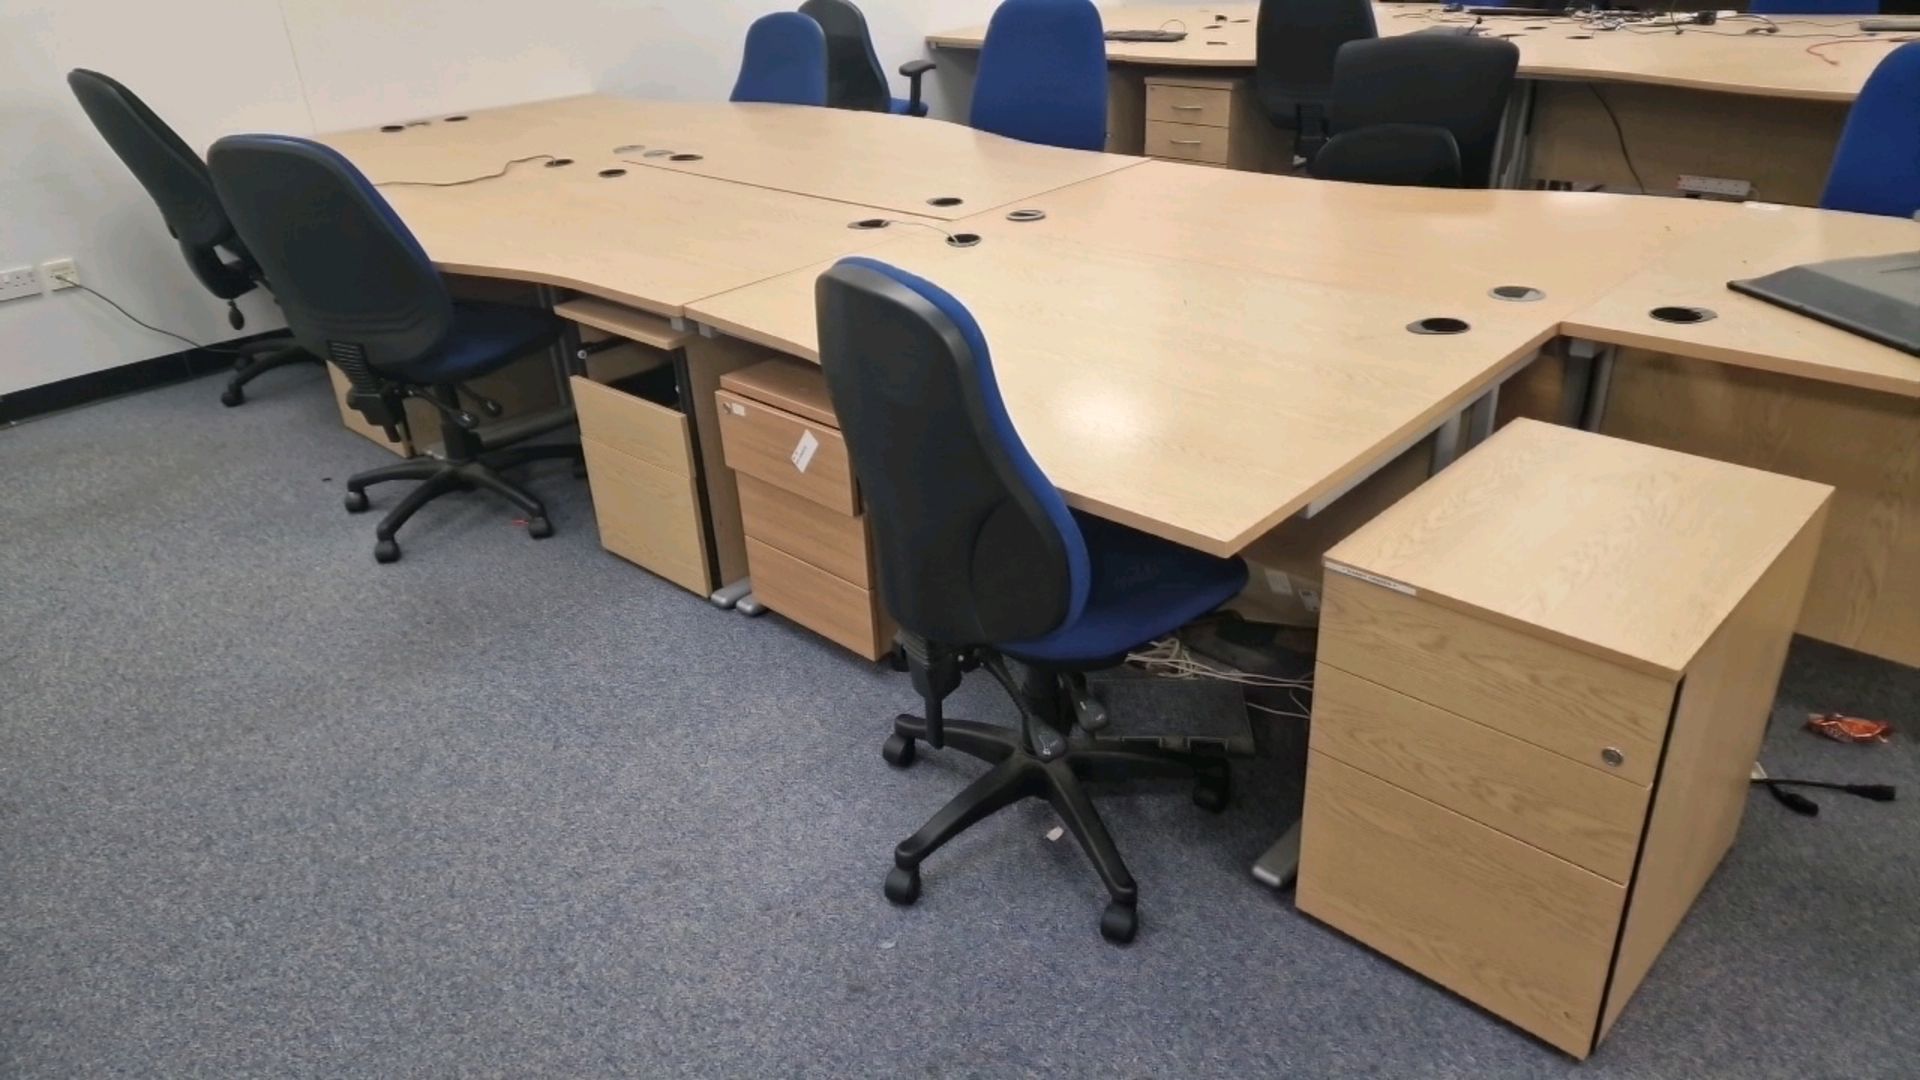 Wooden Effect Office Desks x7 With Office Chairs x7 - Image 3 of 3